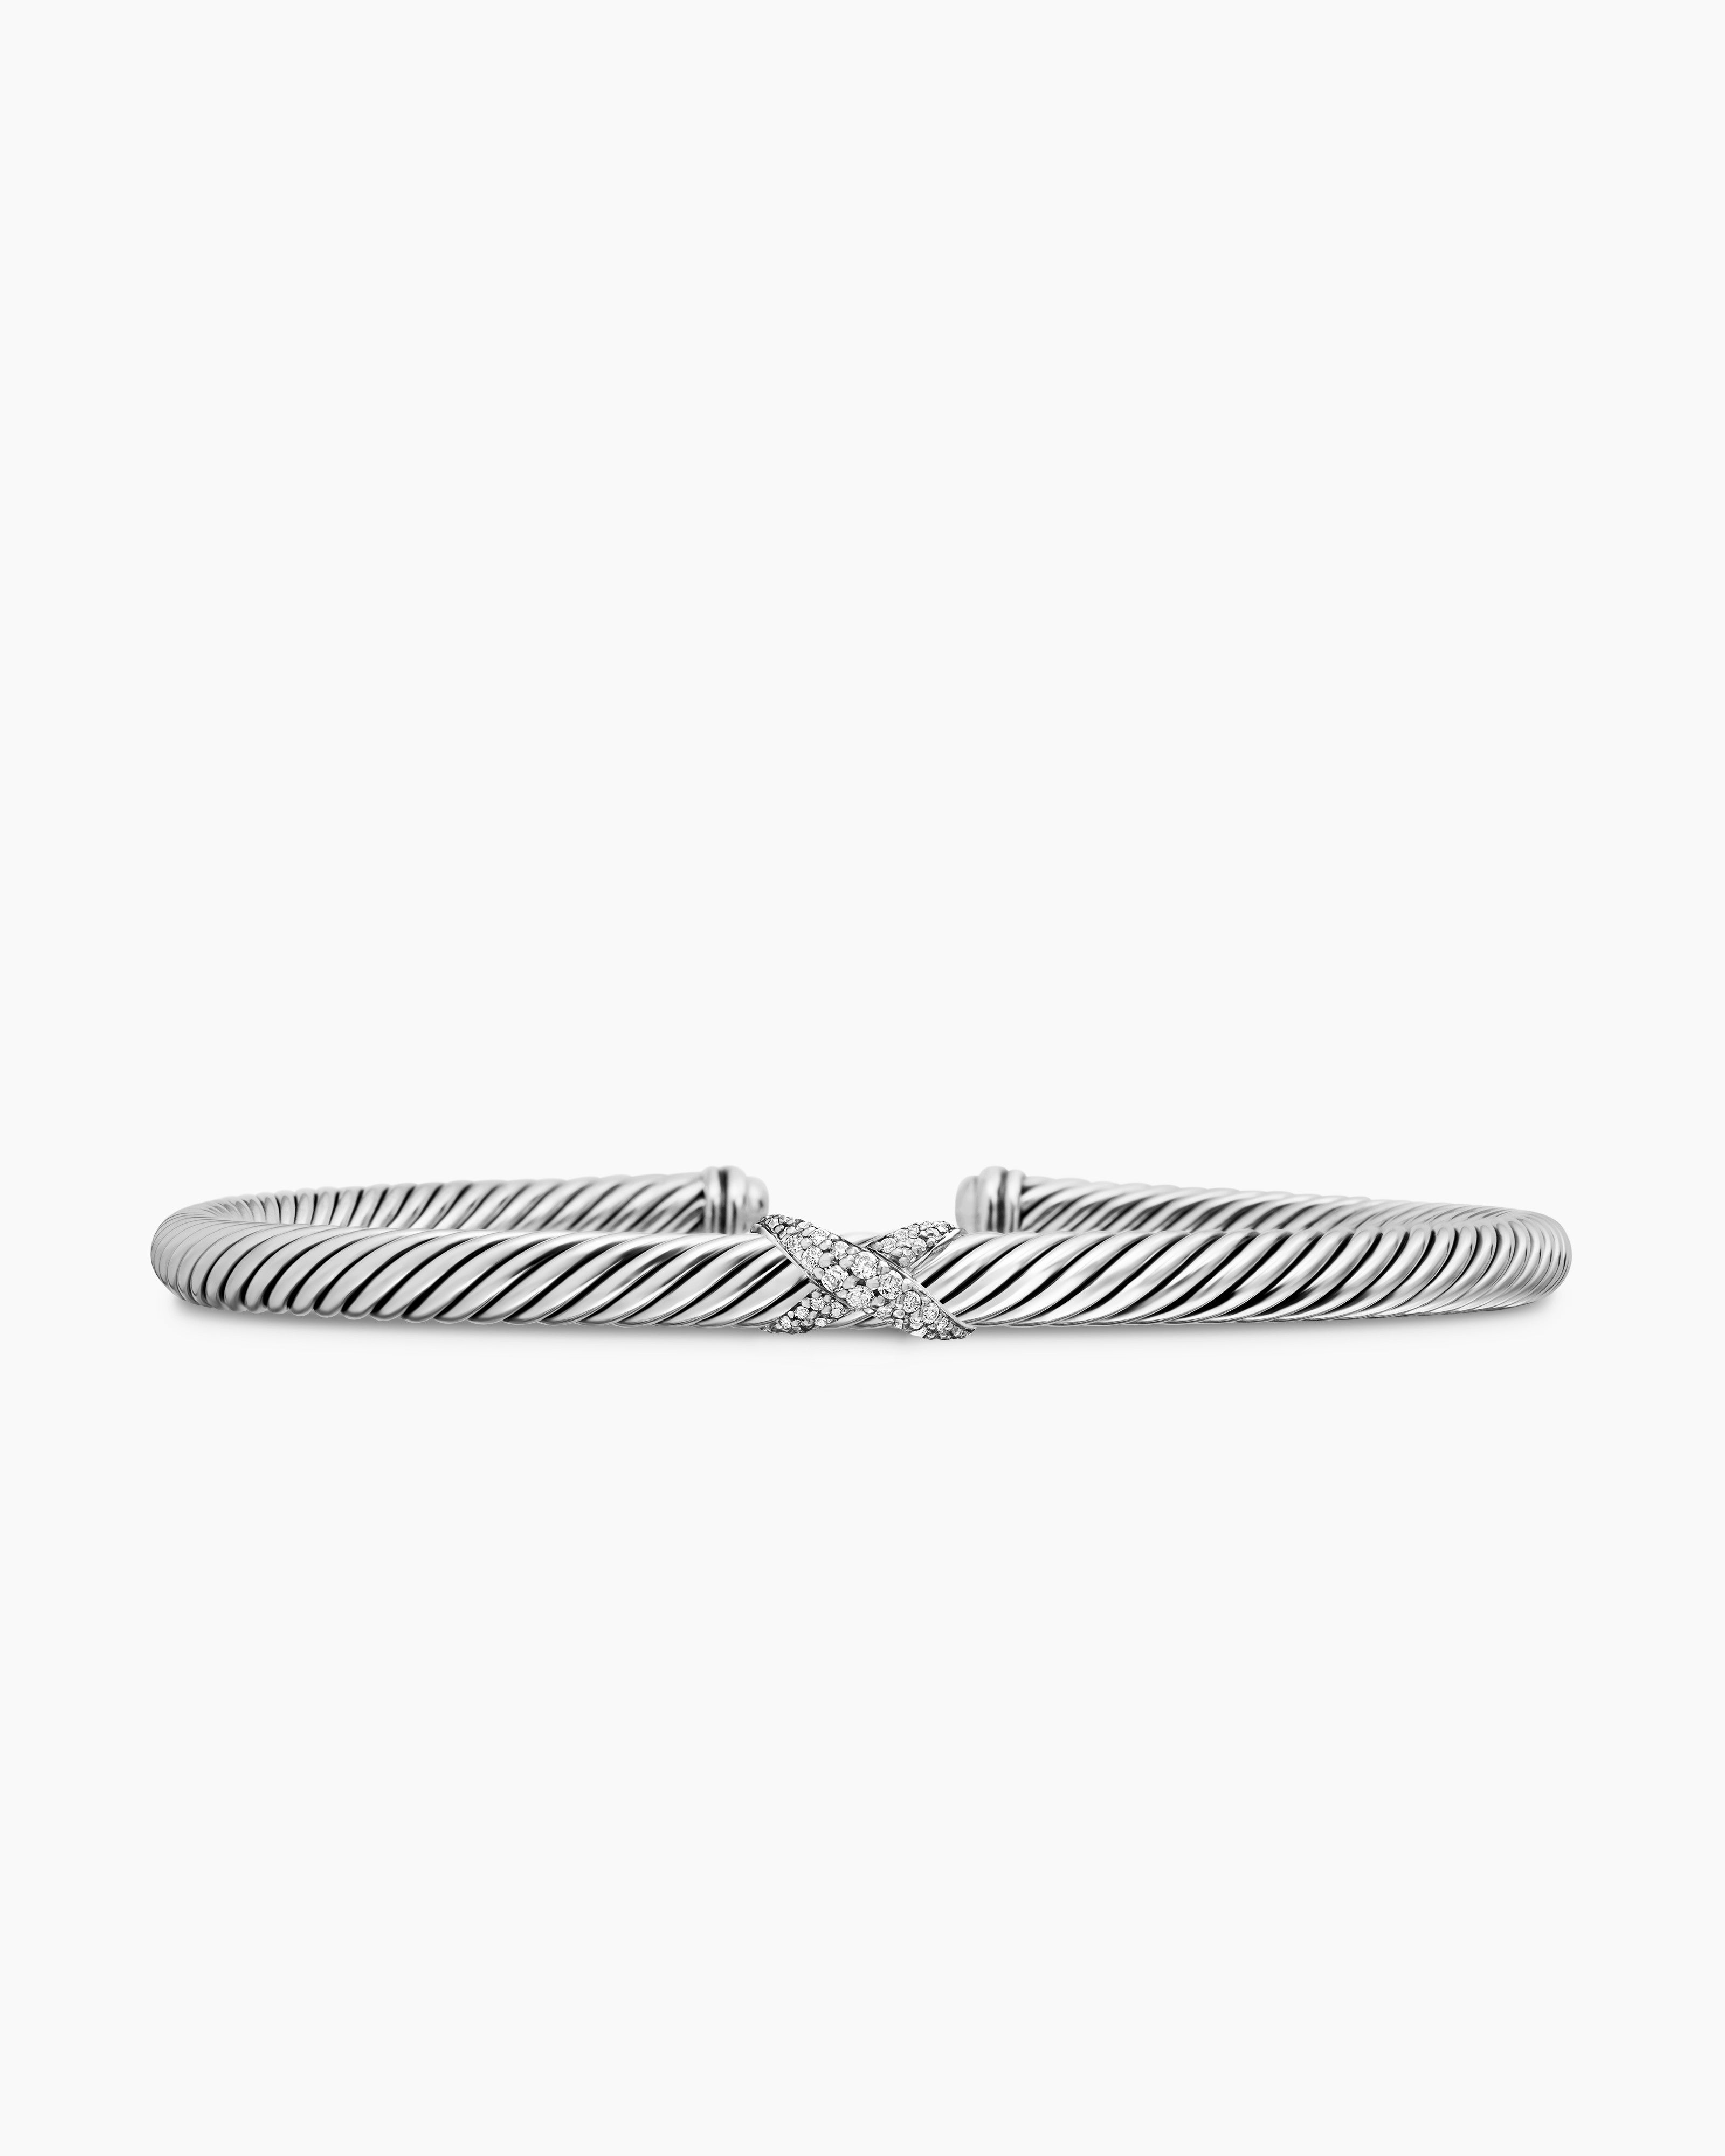 David Yurman Cable Classic Collection Center Station Bracelet with Pave  Diamonds, 7mm | REEDS Jewelers